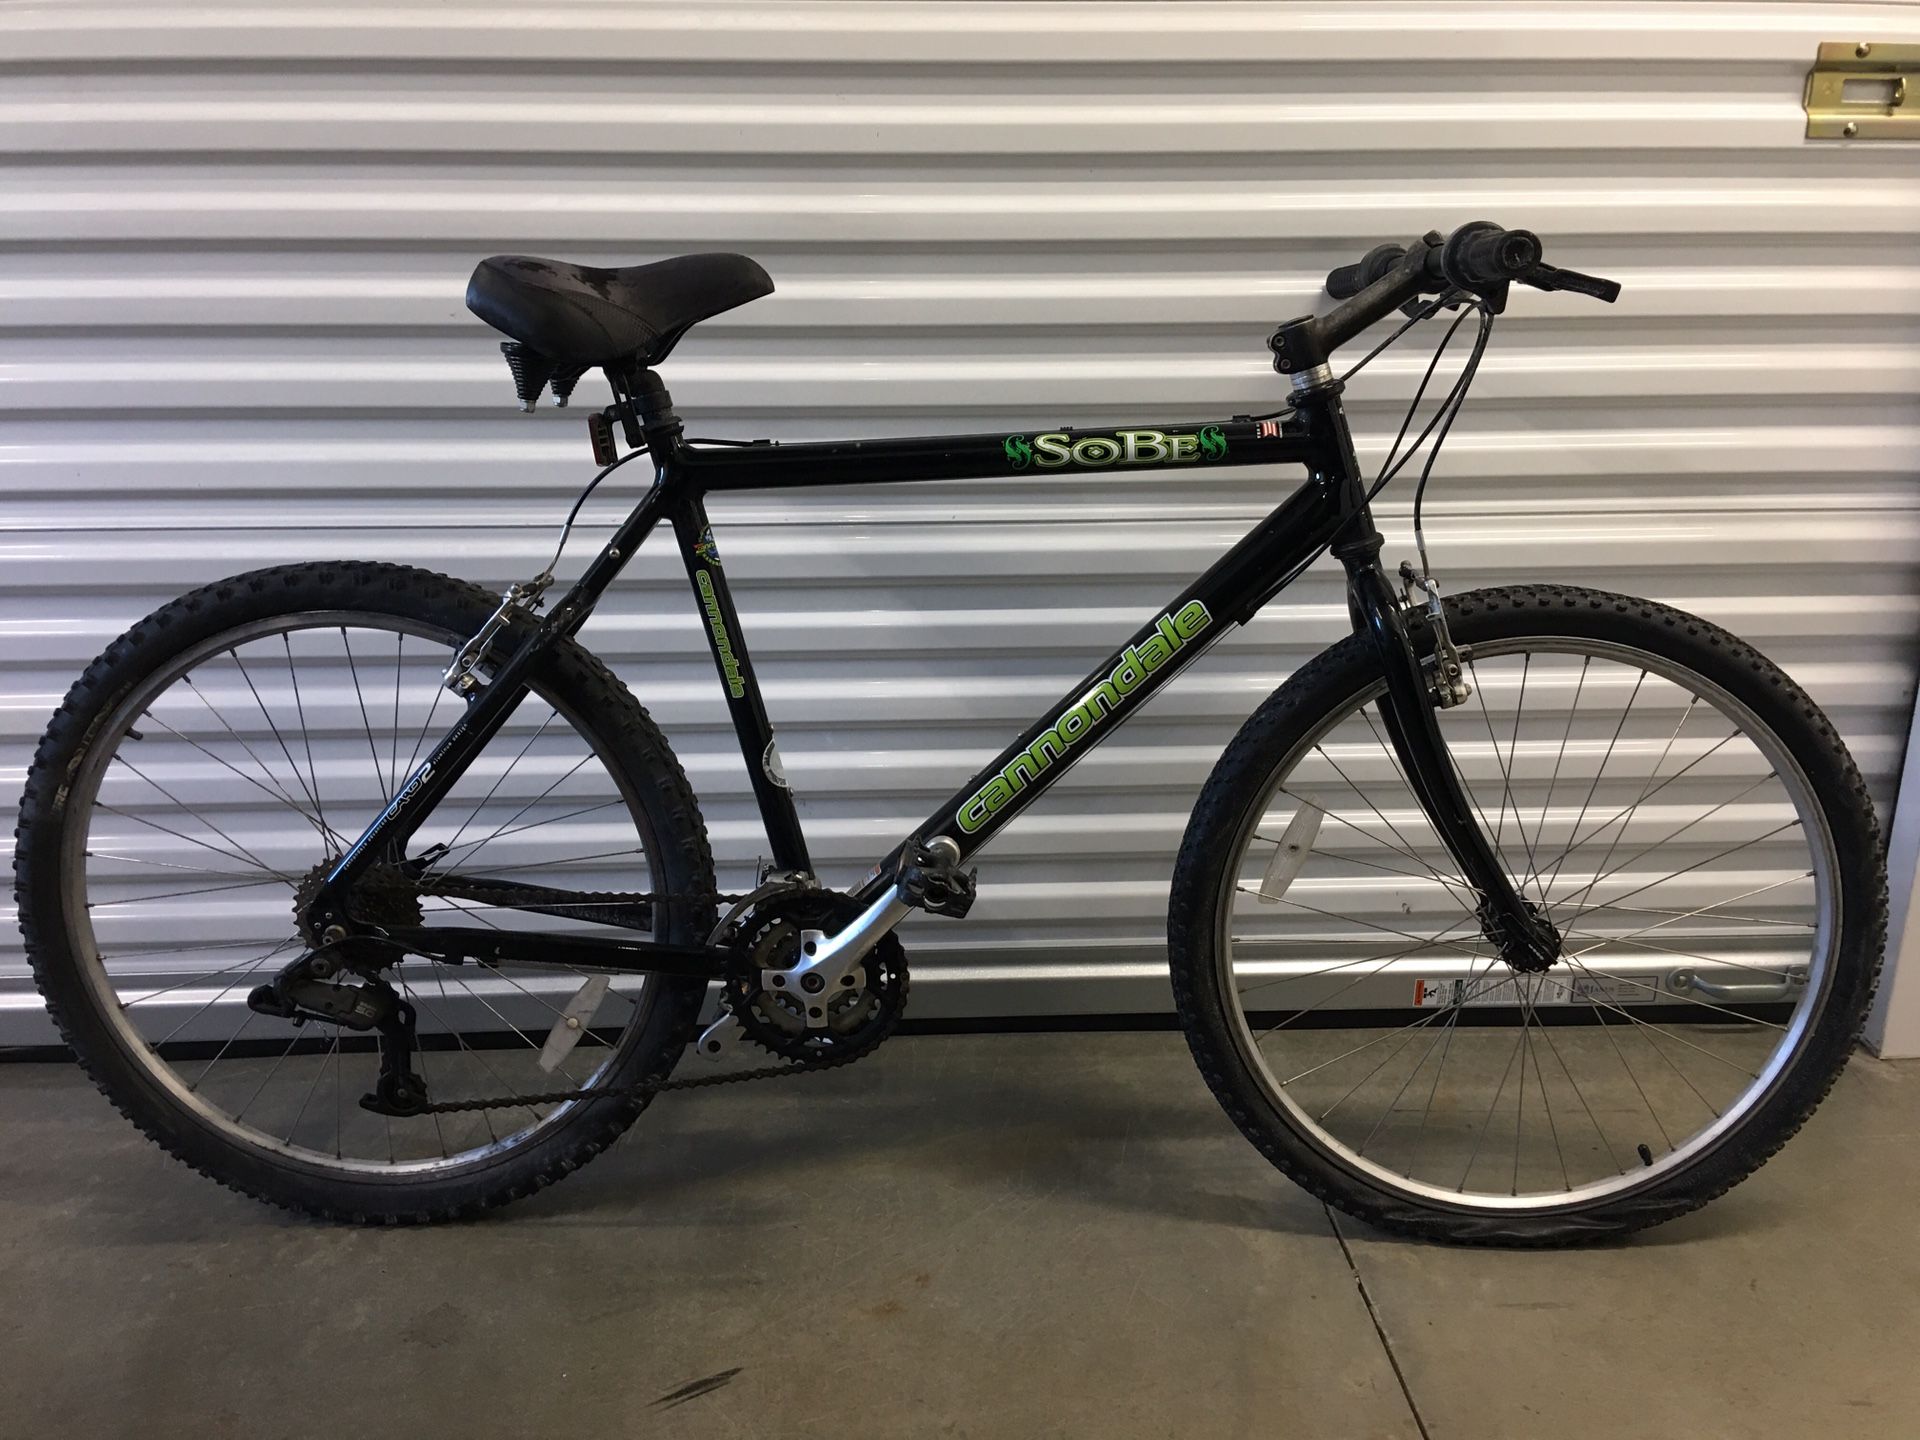 Cannondale CAD2 Sobe Team Issued Mountain Bike